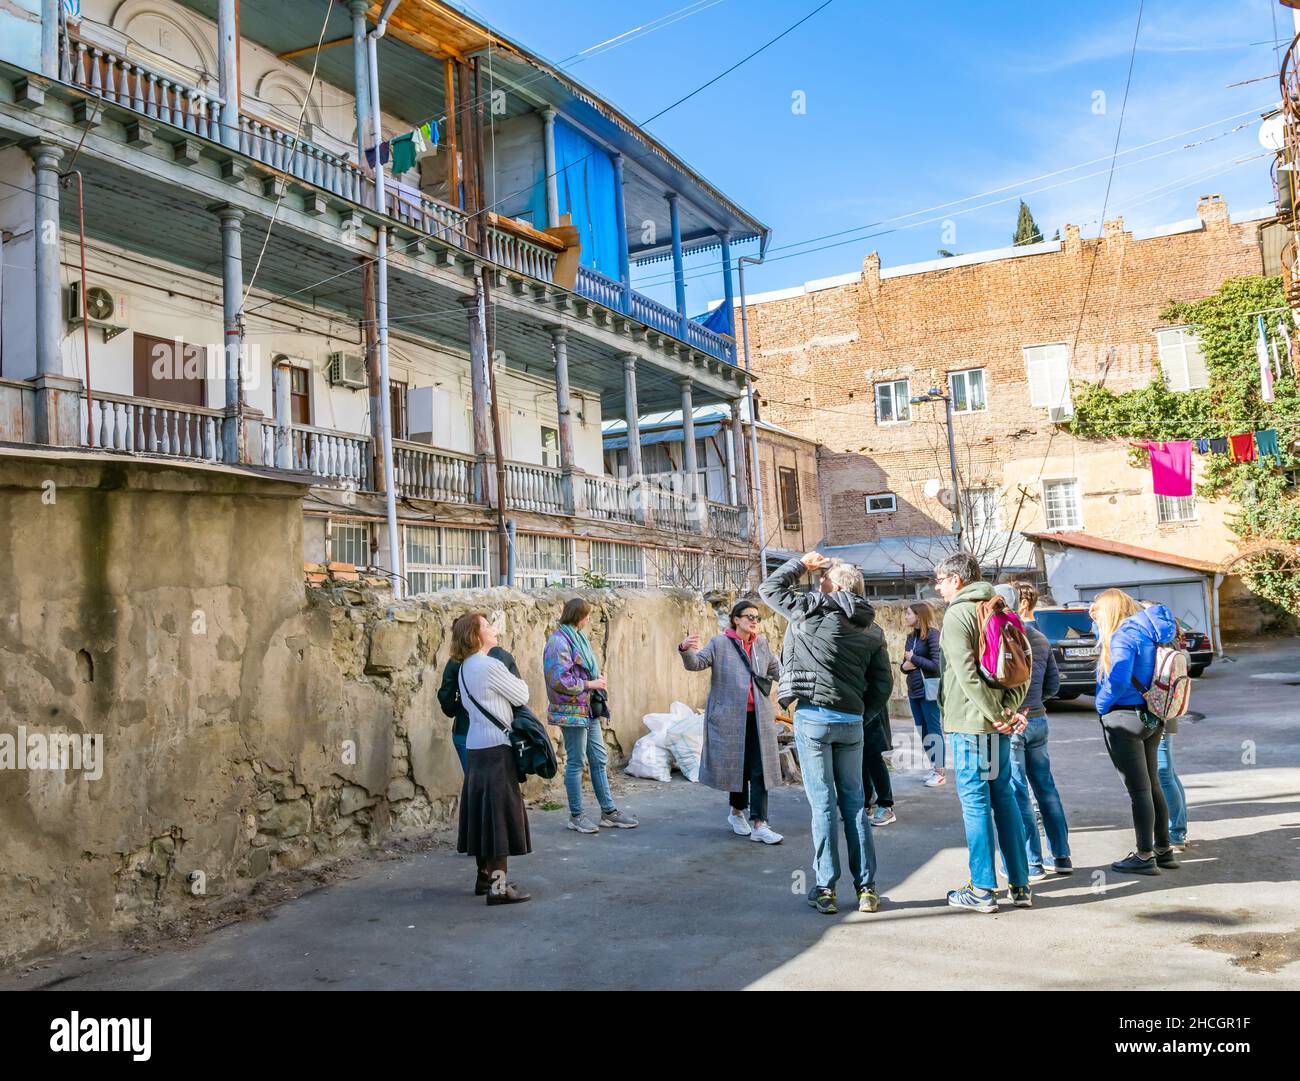 Female tour guide is showing old neighborhood buidings in Tbilisi. Tourism and free walking tours in  Sakartvelo (Georgia). 03.03.2020. Stock Photo